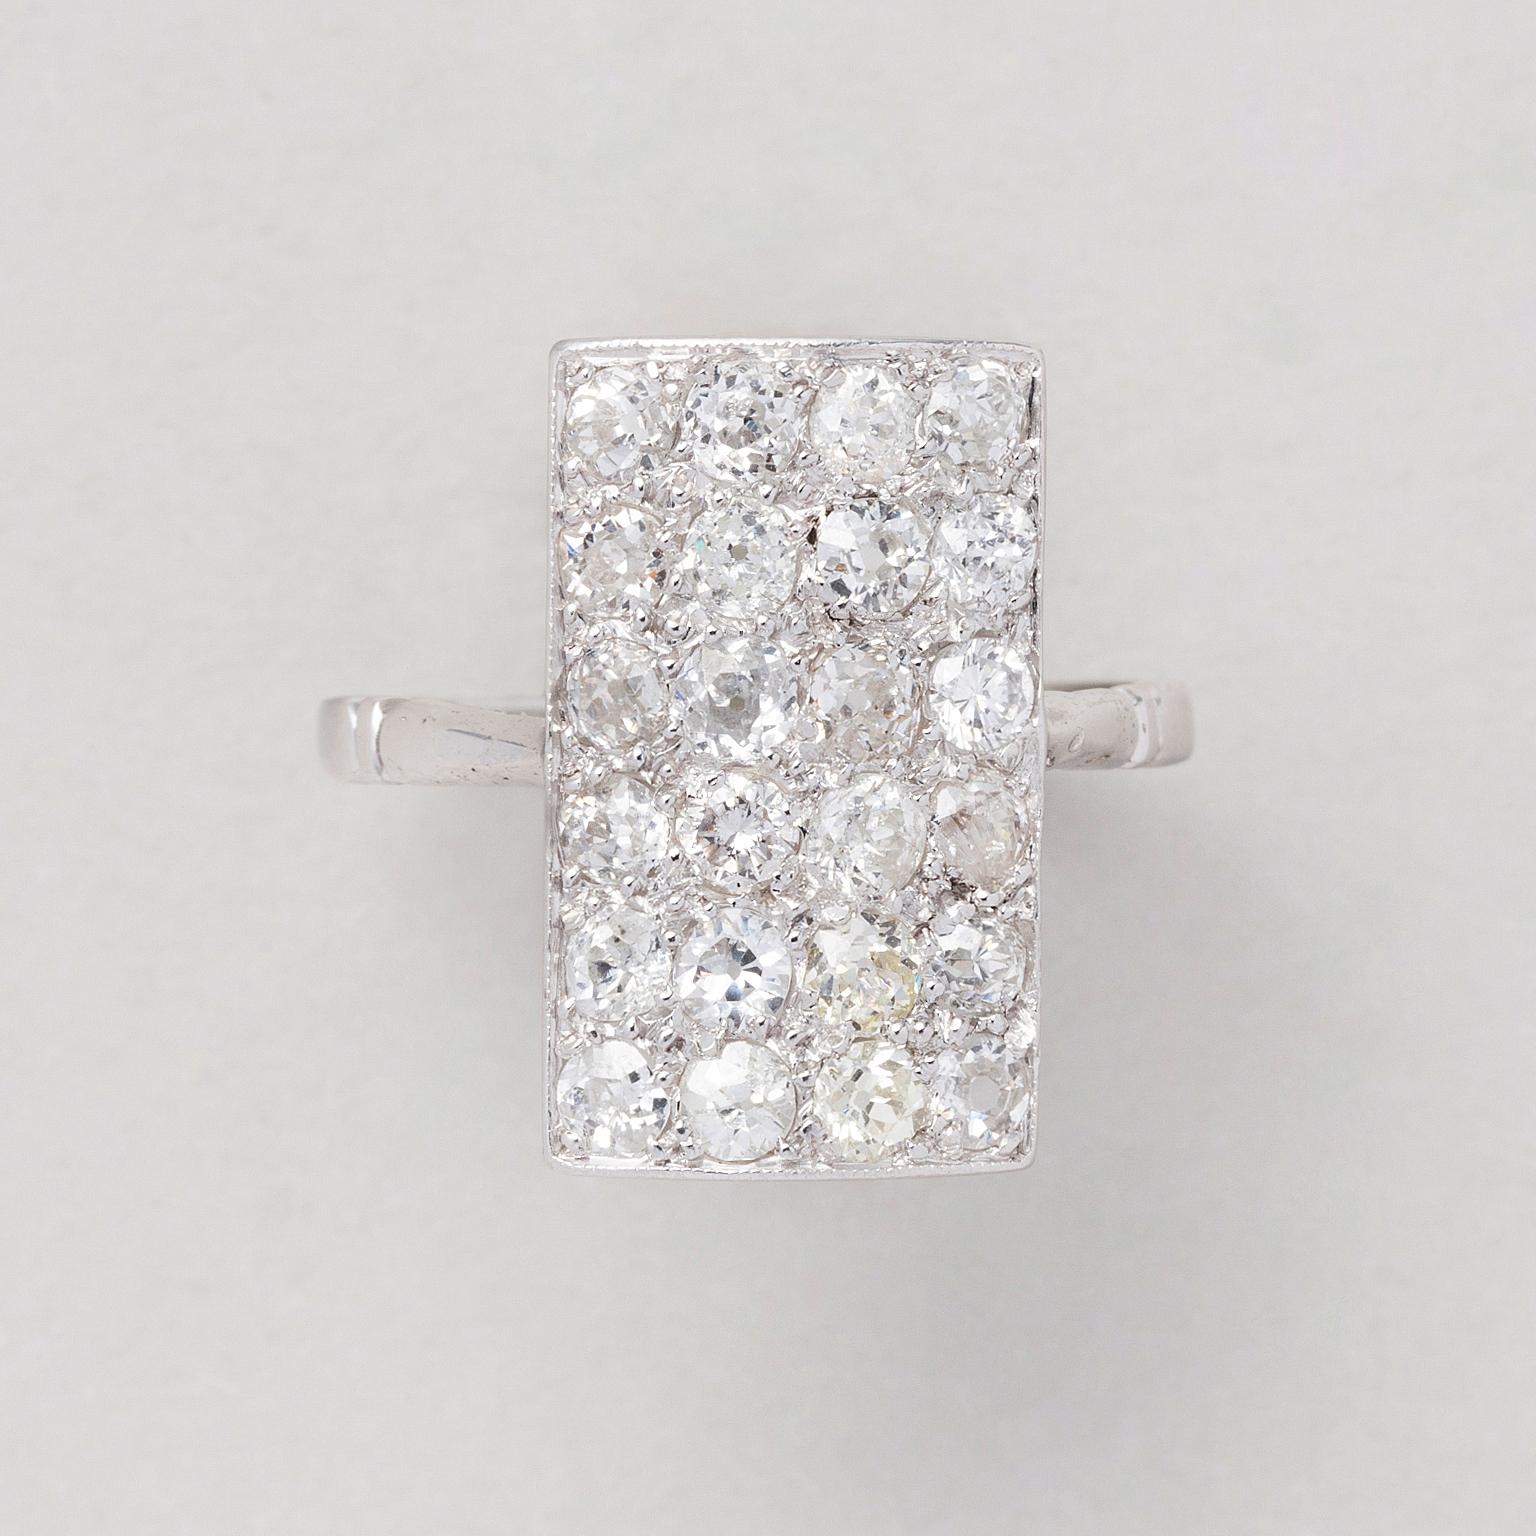 A delicate platinum Art Deco ring with a rectangular concave panel set with 23 old European cut diamonds and one (replaced) modern brilliant cut diamond (app. 1.68 ct., H-I / VS) with open worked sides, France, circa 1925 marked with French assay